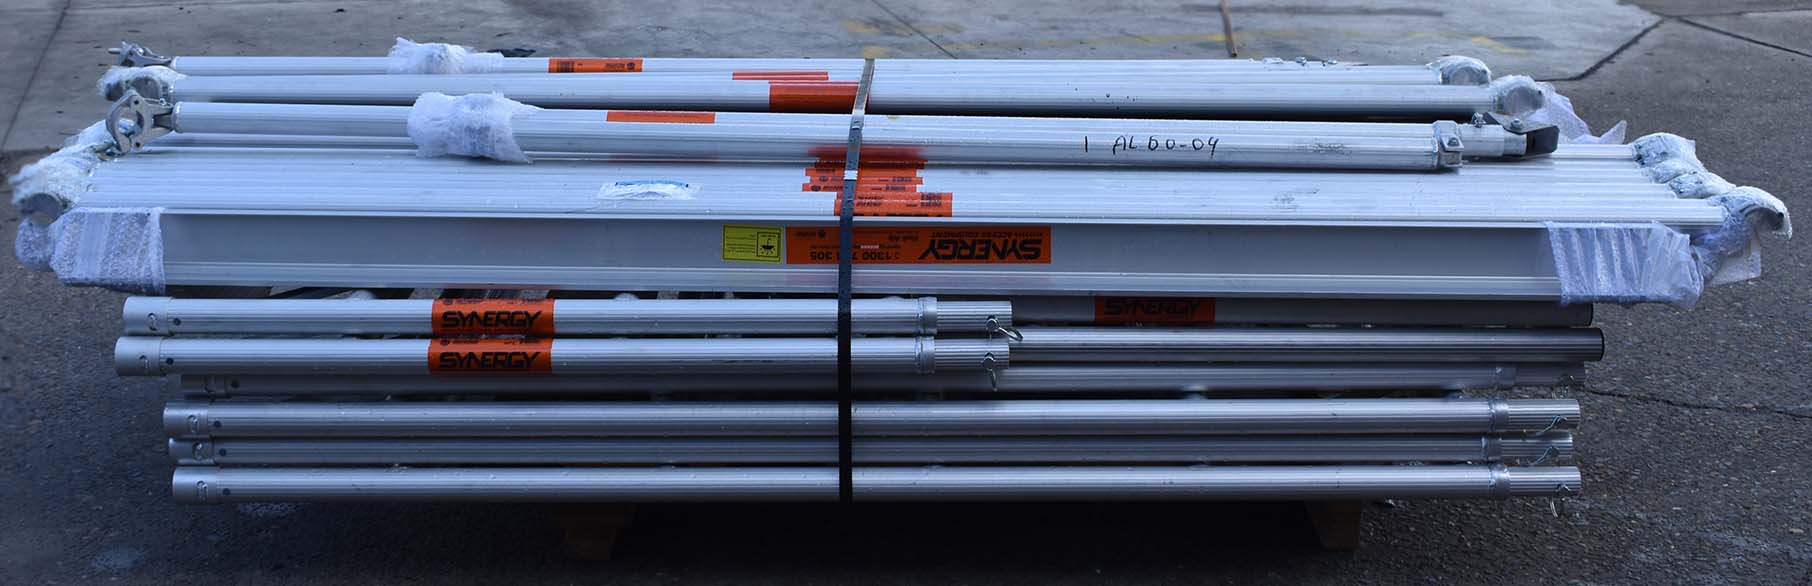 Aluminium Foldable Extendable Wide Scaffold 2.2m (Height) 1.2m - 2.0m (Scaffold Length) (a)